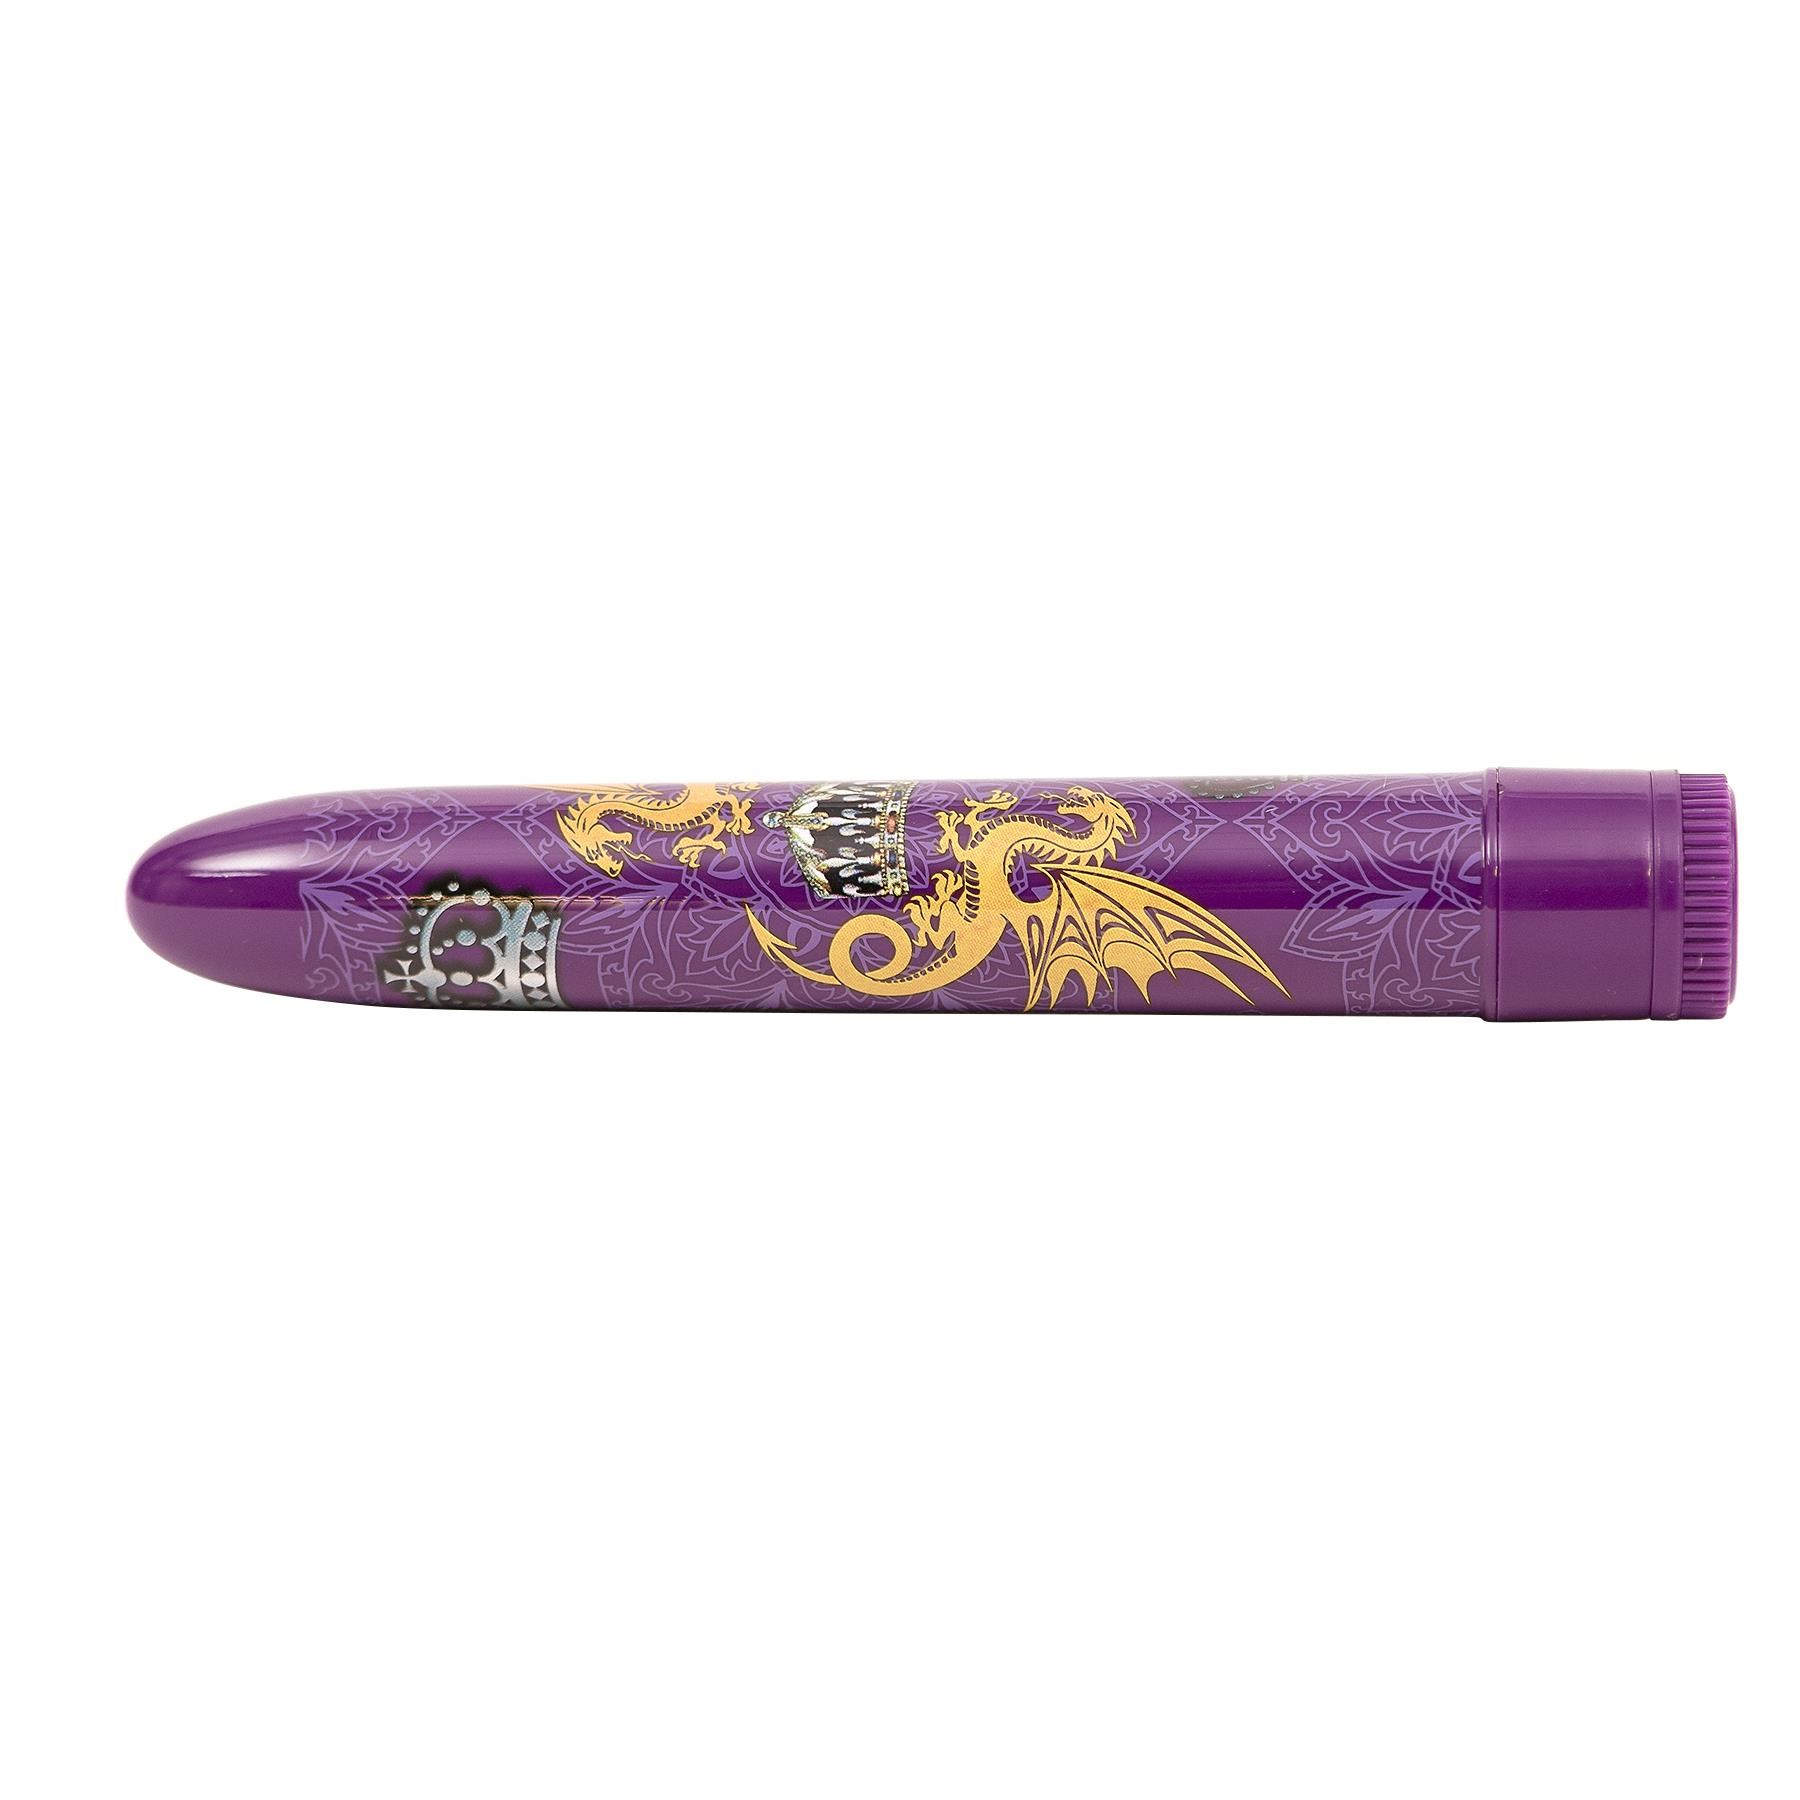 Dragons And Crowns Vibrator - Product Shot